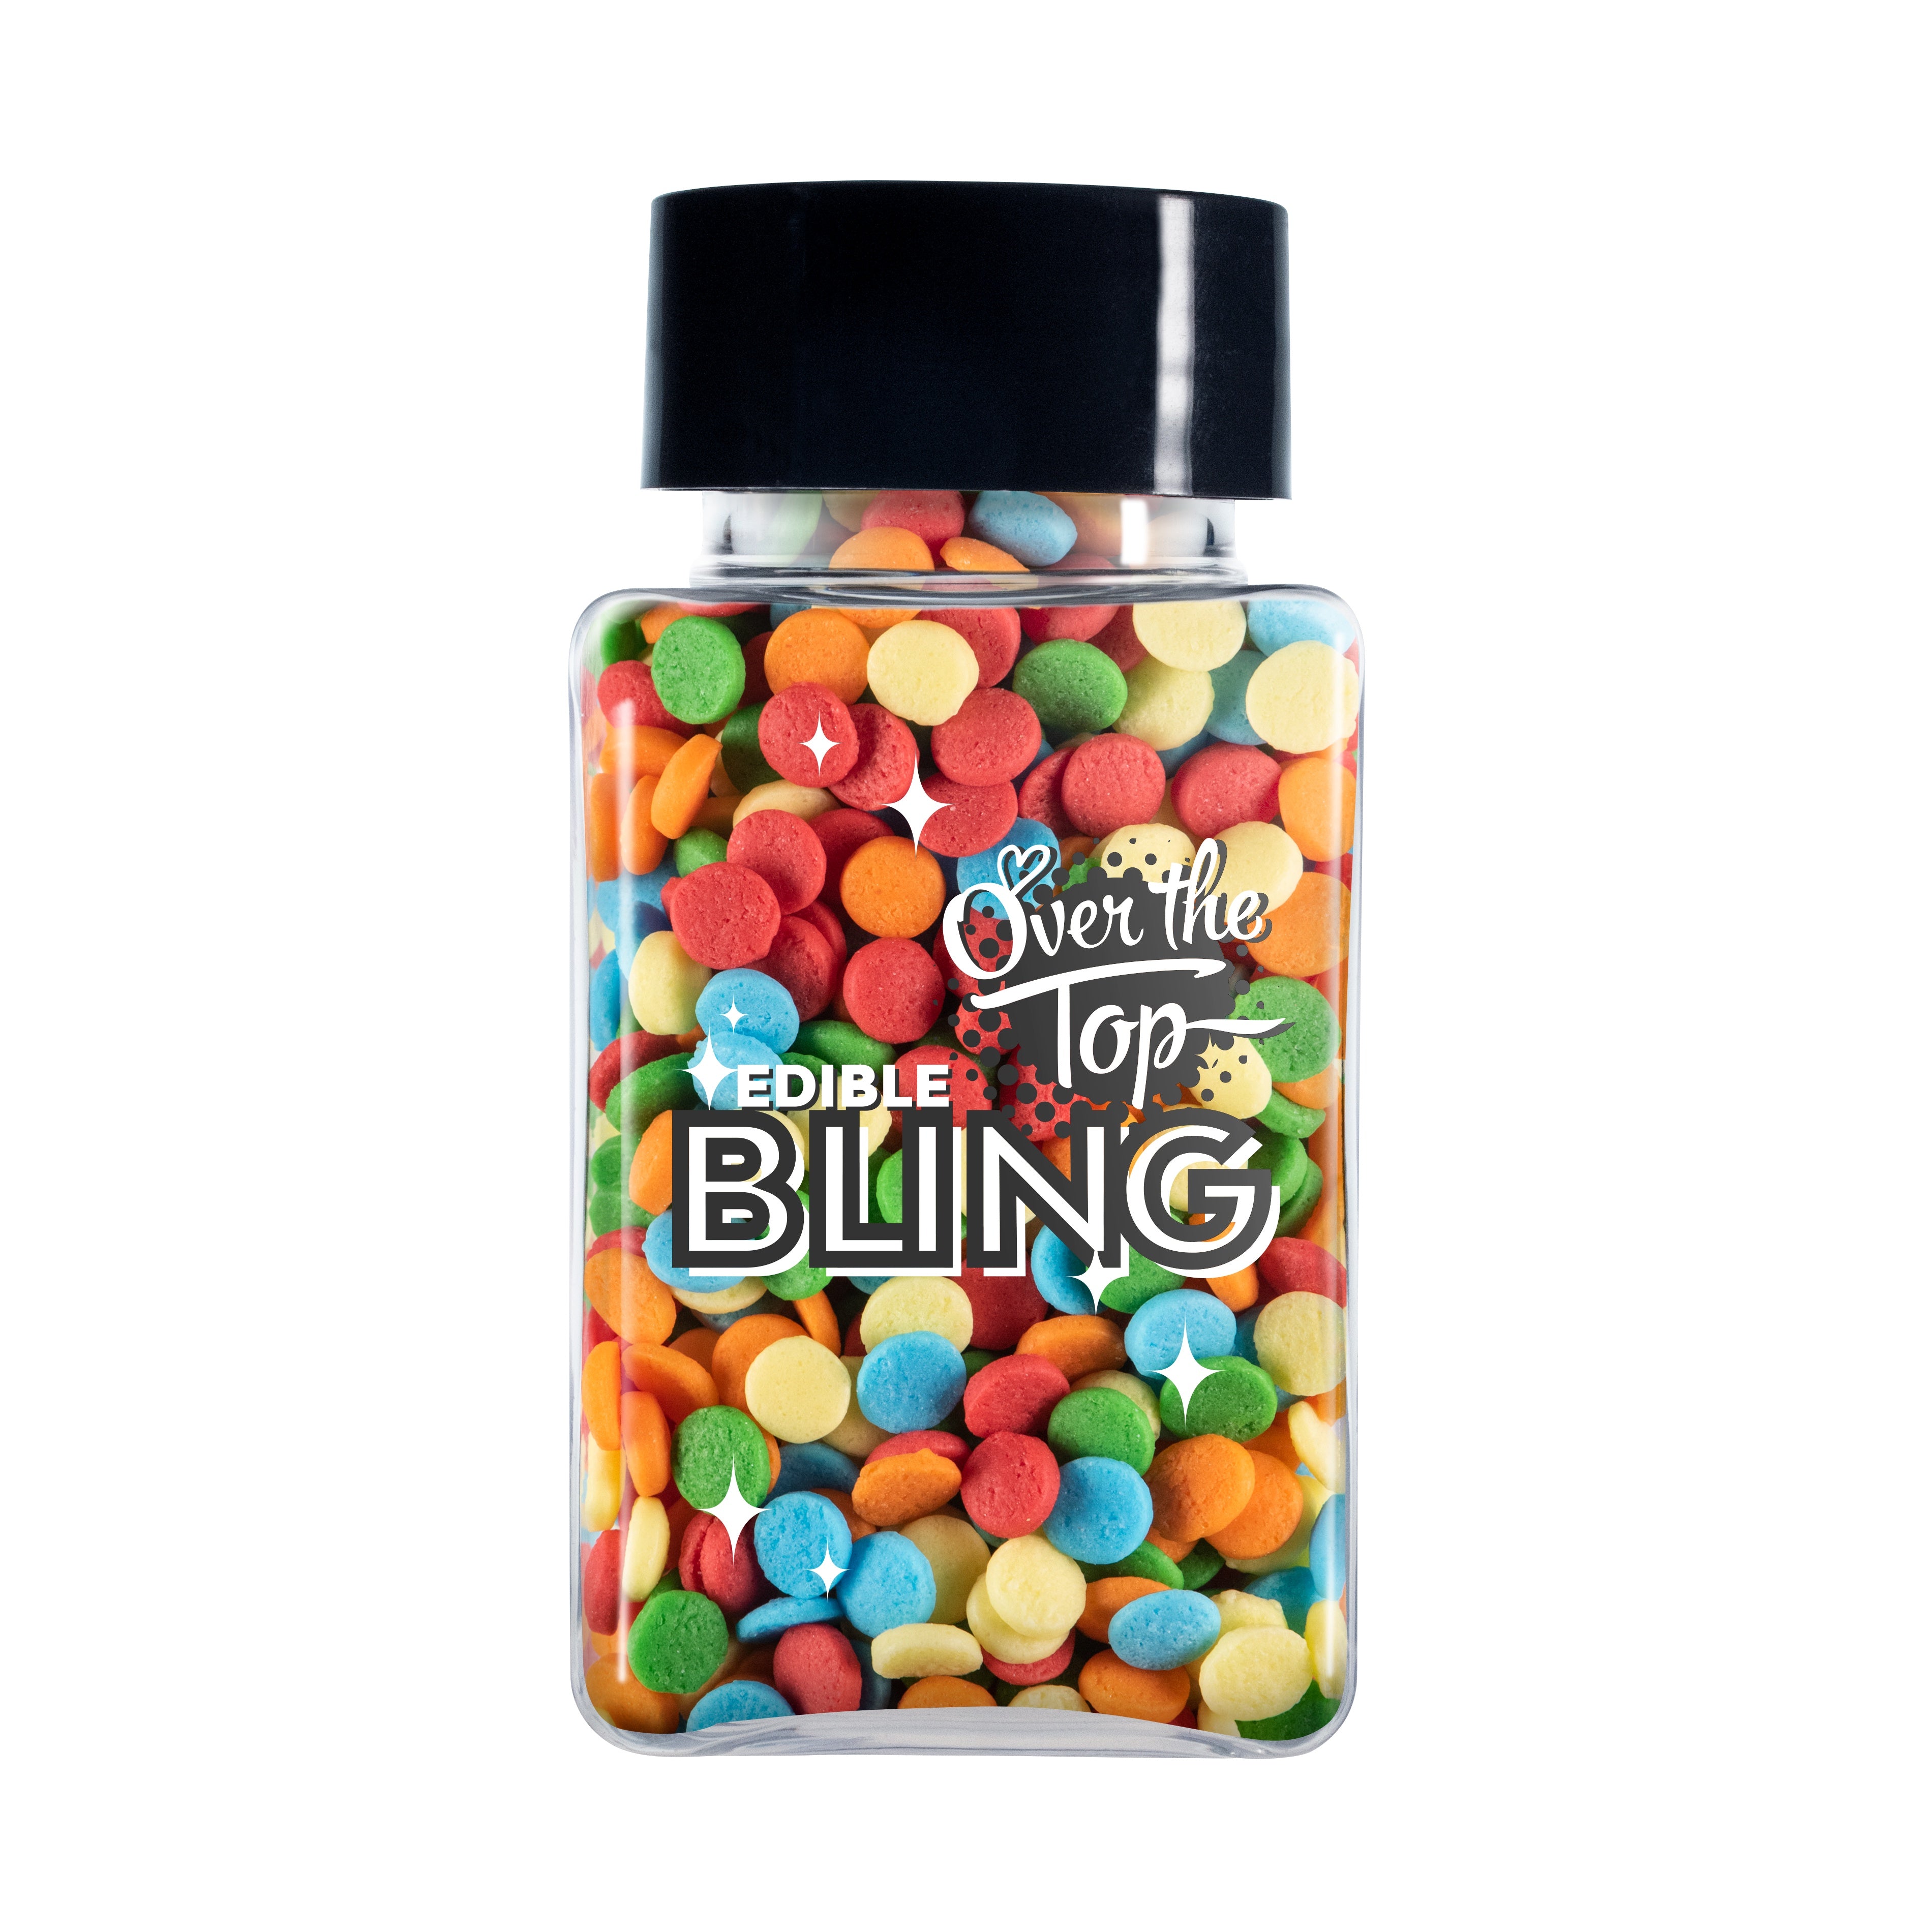 Over The Top Edible Bling Sprinkles - Bright Sequins 55g